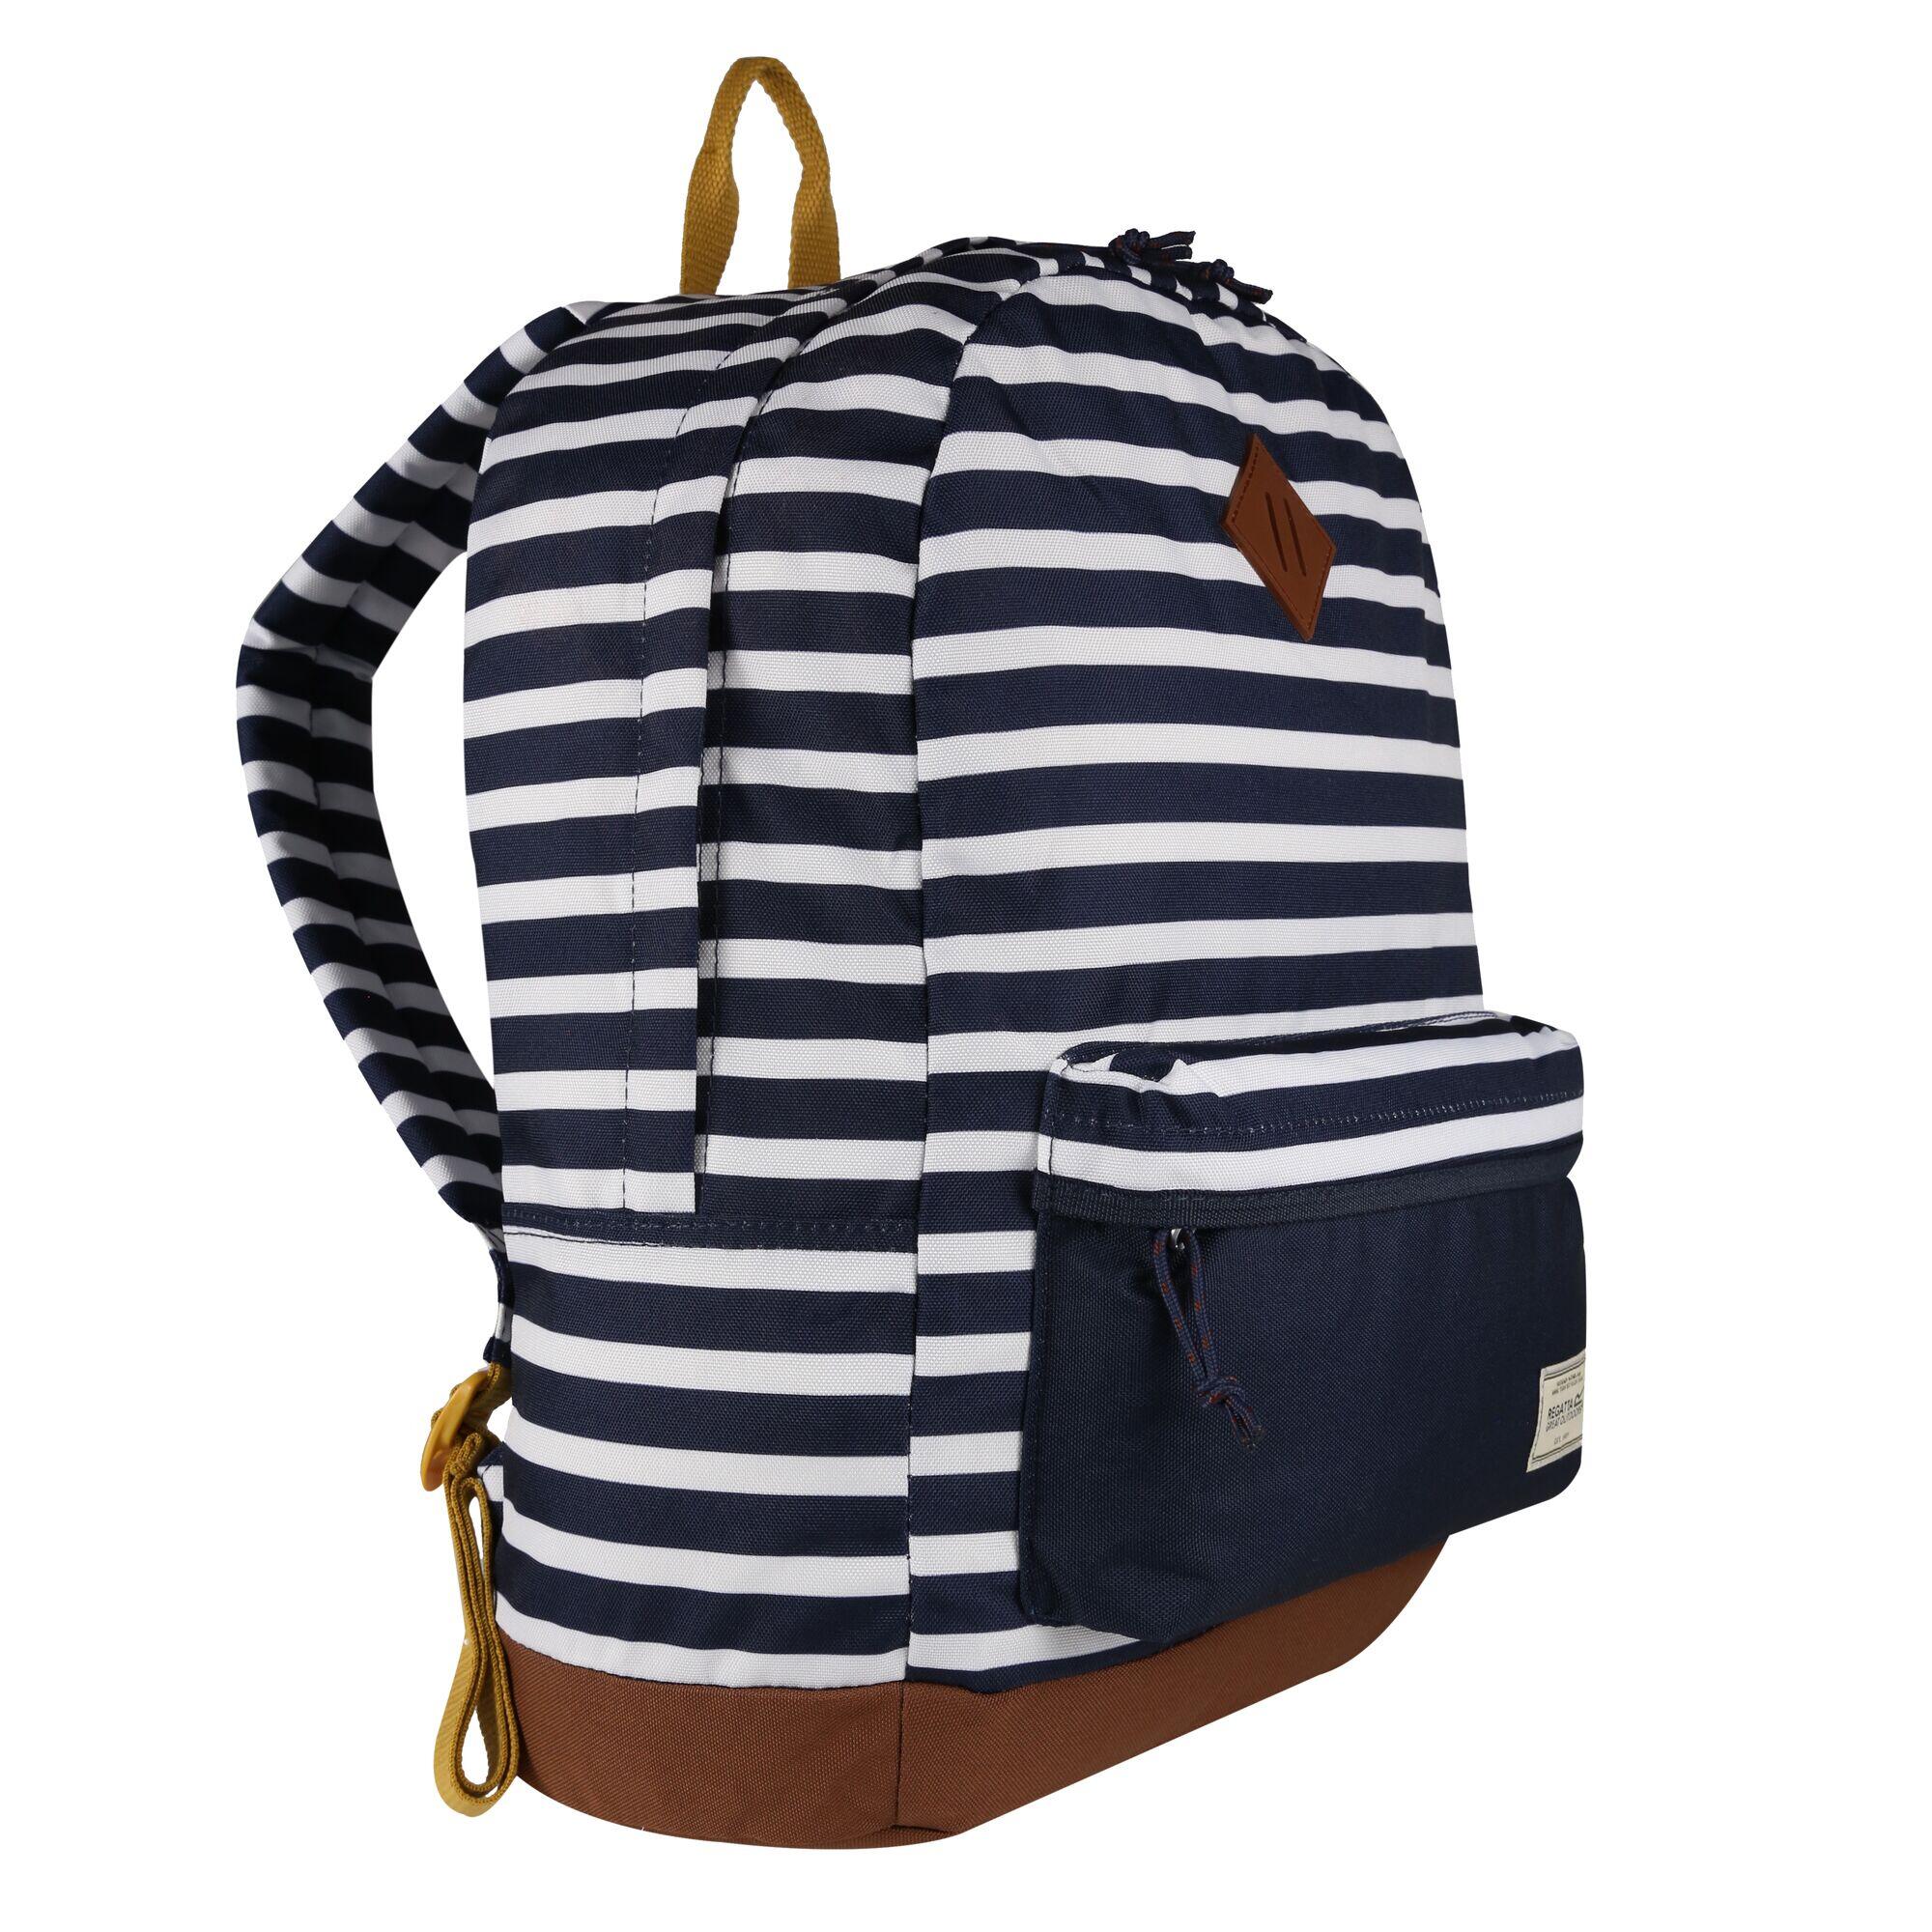 Stamford 20L Adults' Unisex Hiking Backpack - Navy Stripe 2/3